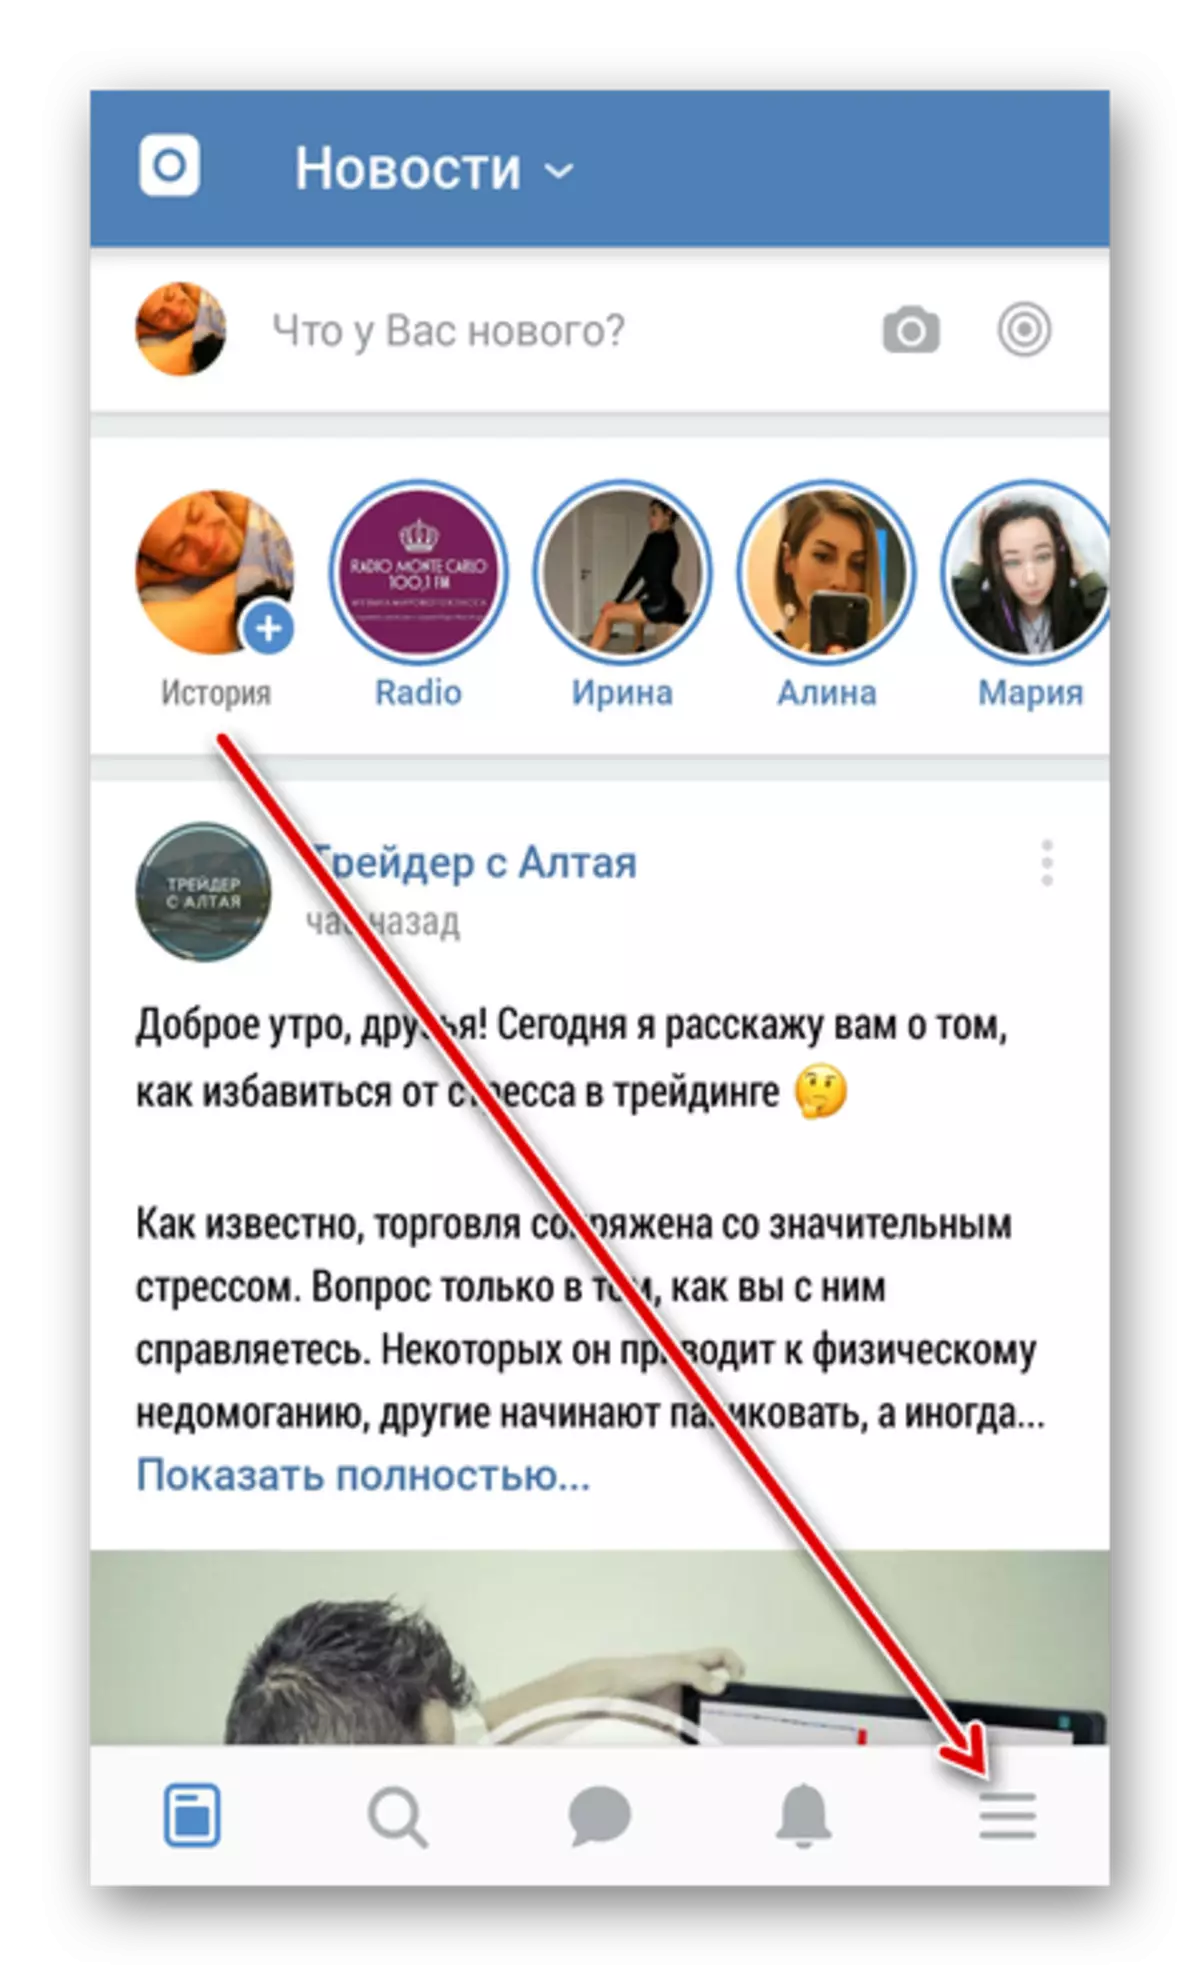 Log in to the VKontakte application